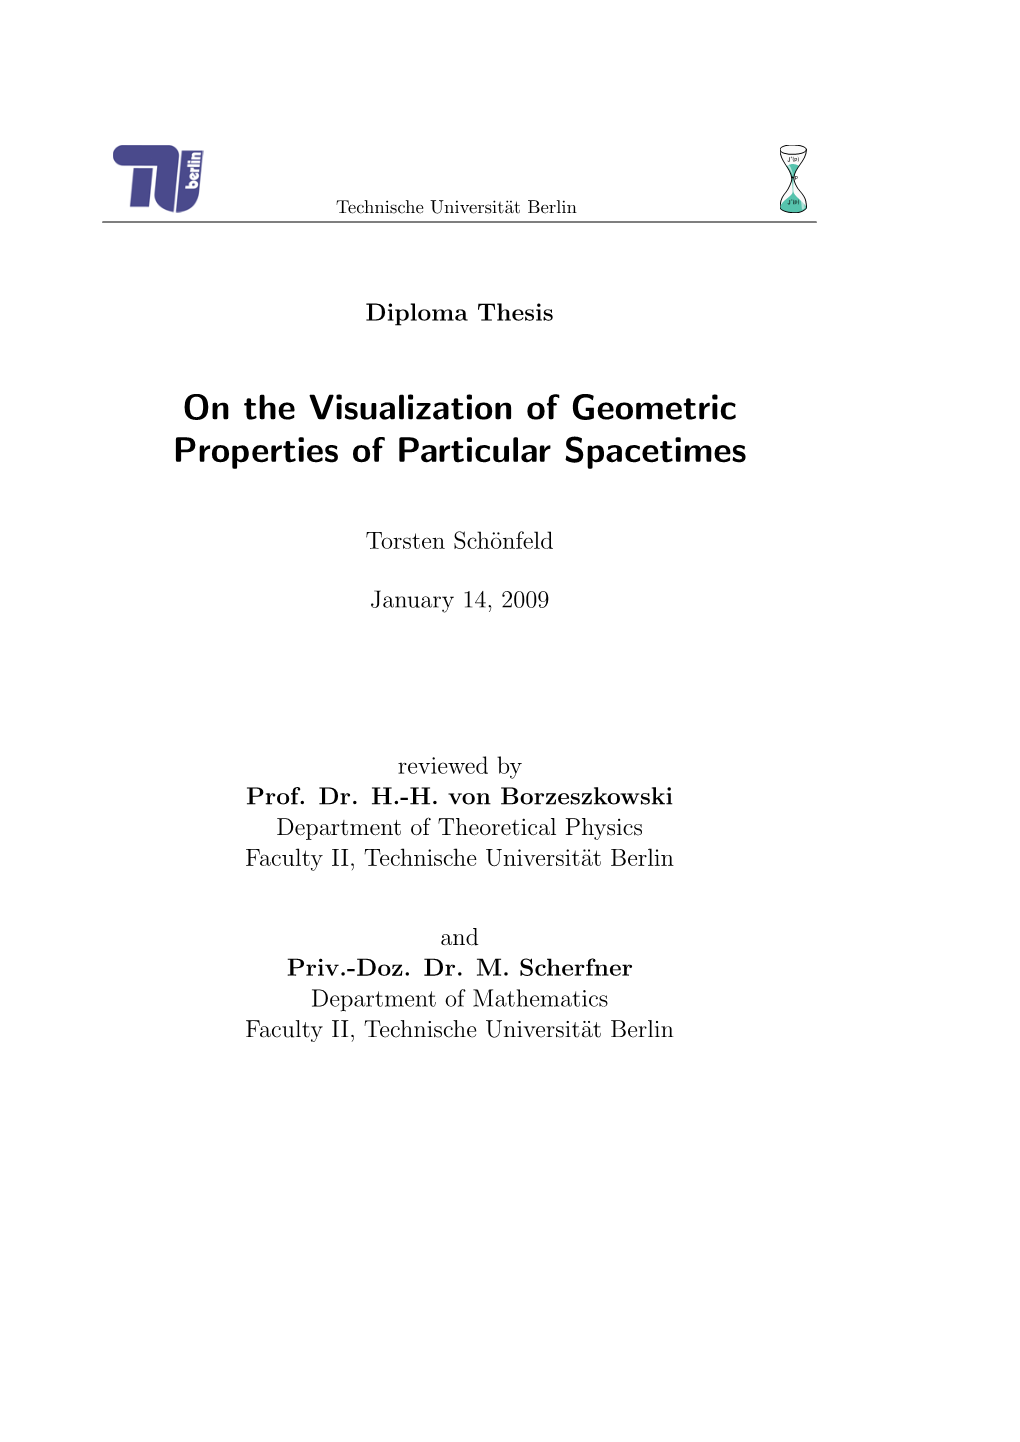 On the Visualization of Geometric Properties of Particular Spacetimes